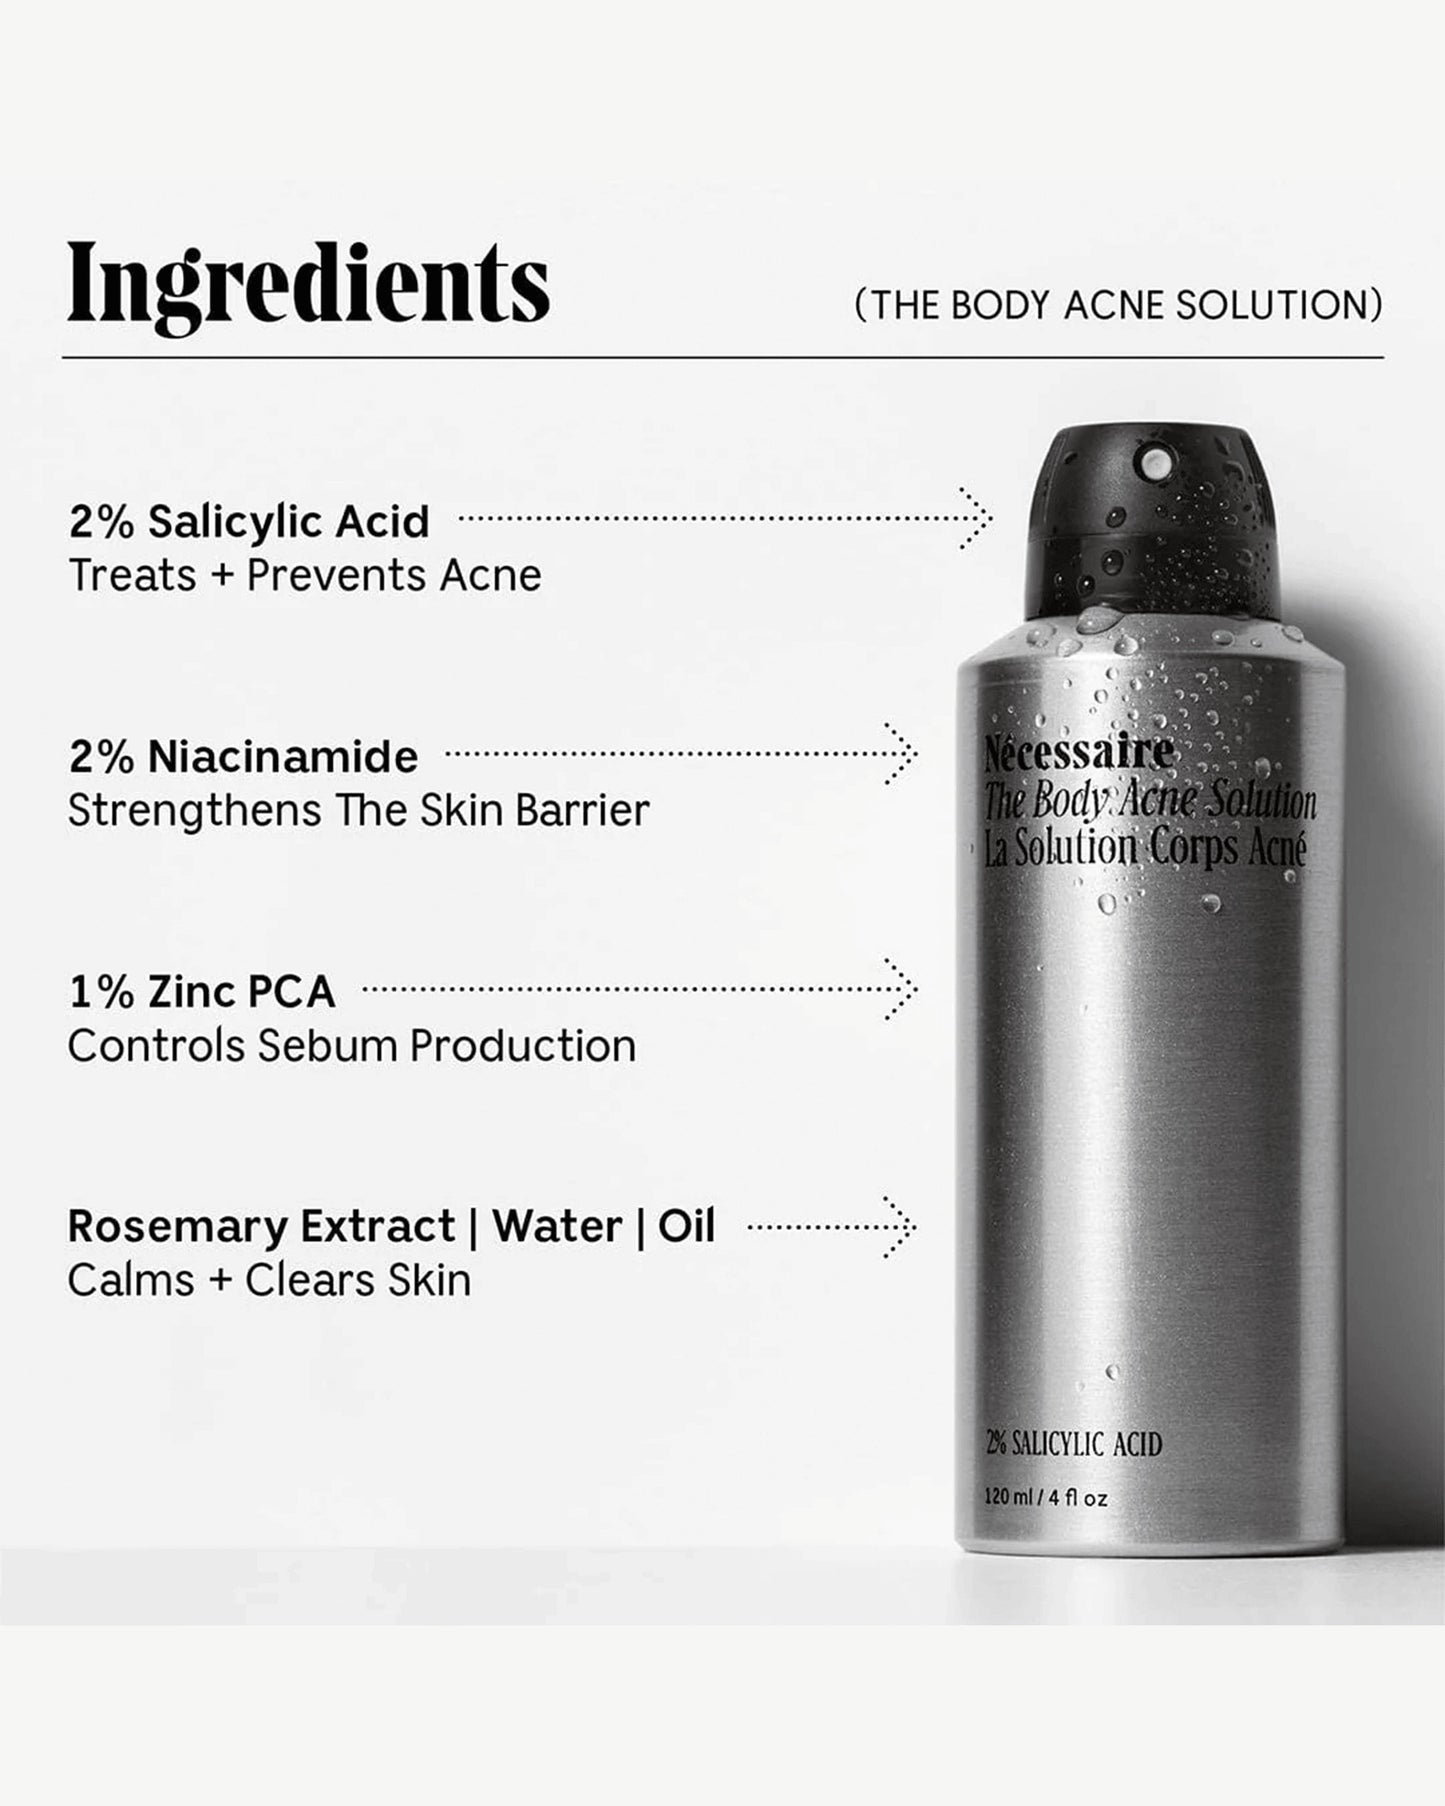 The Body Acne Solution